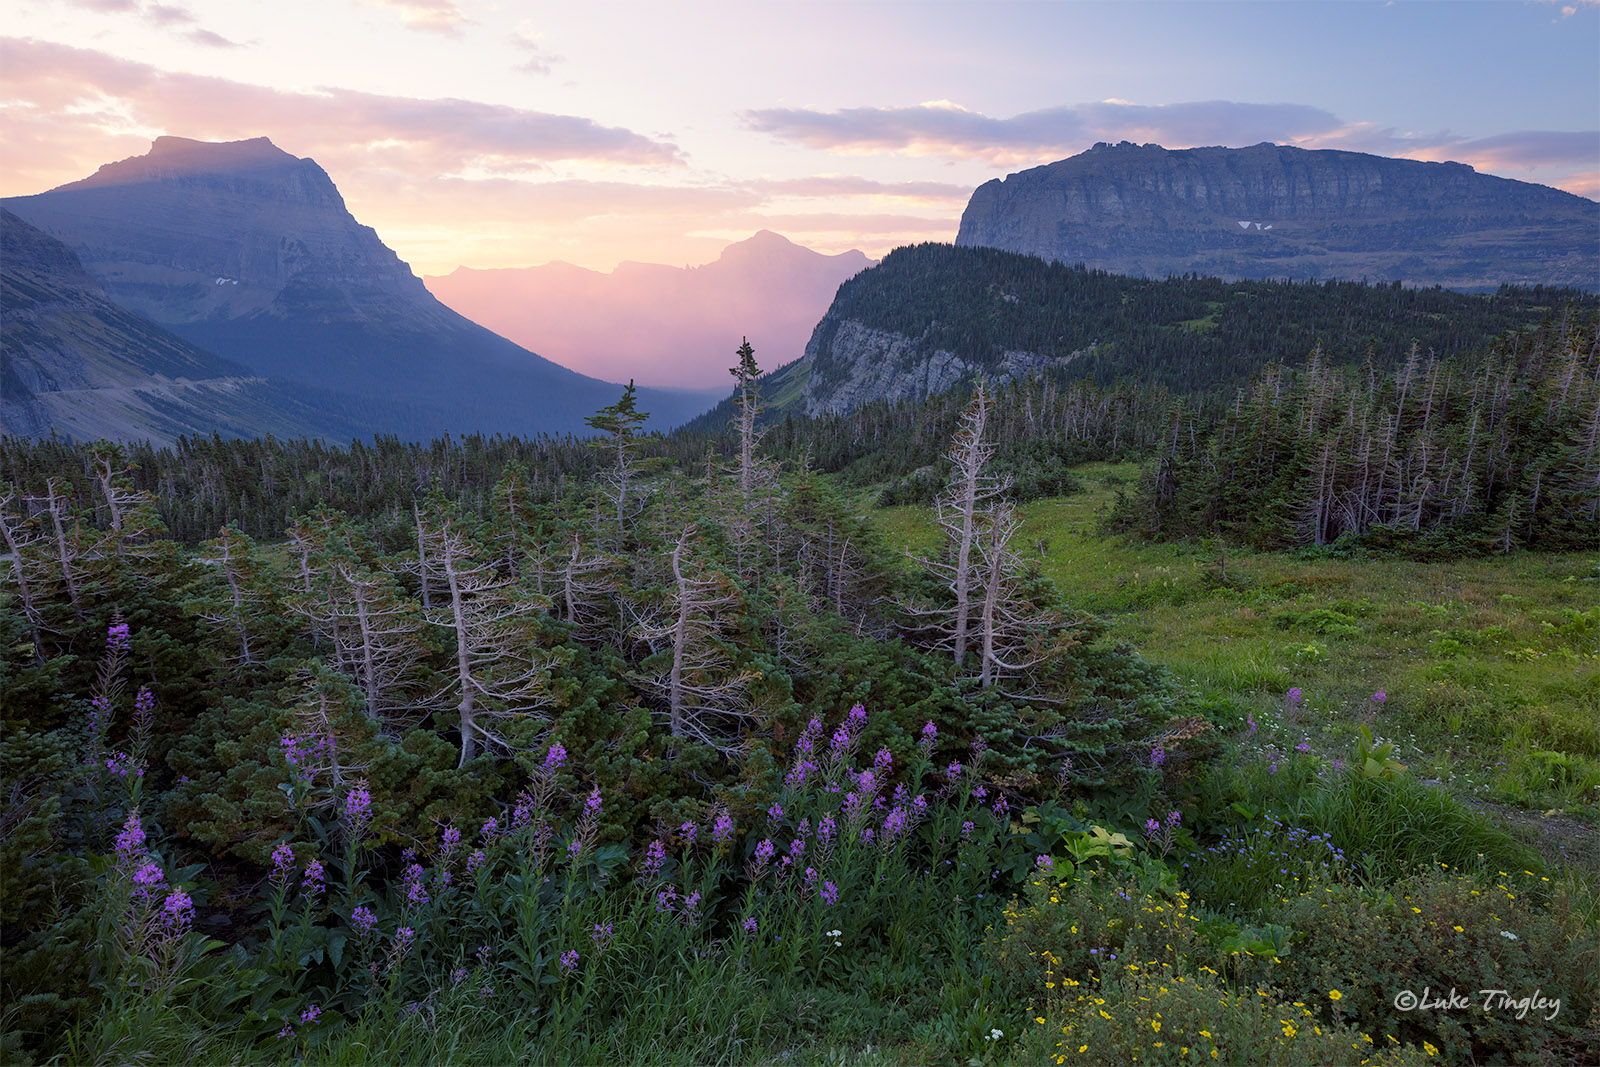 Smoke in the valley absorbs and radiates the early morning sunlight shooting through the valley in Glacier National Park.